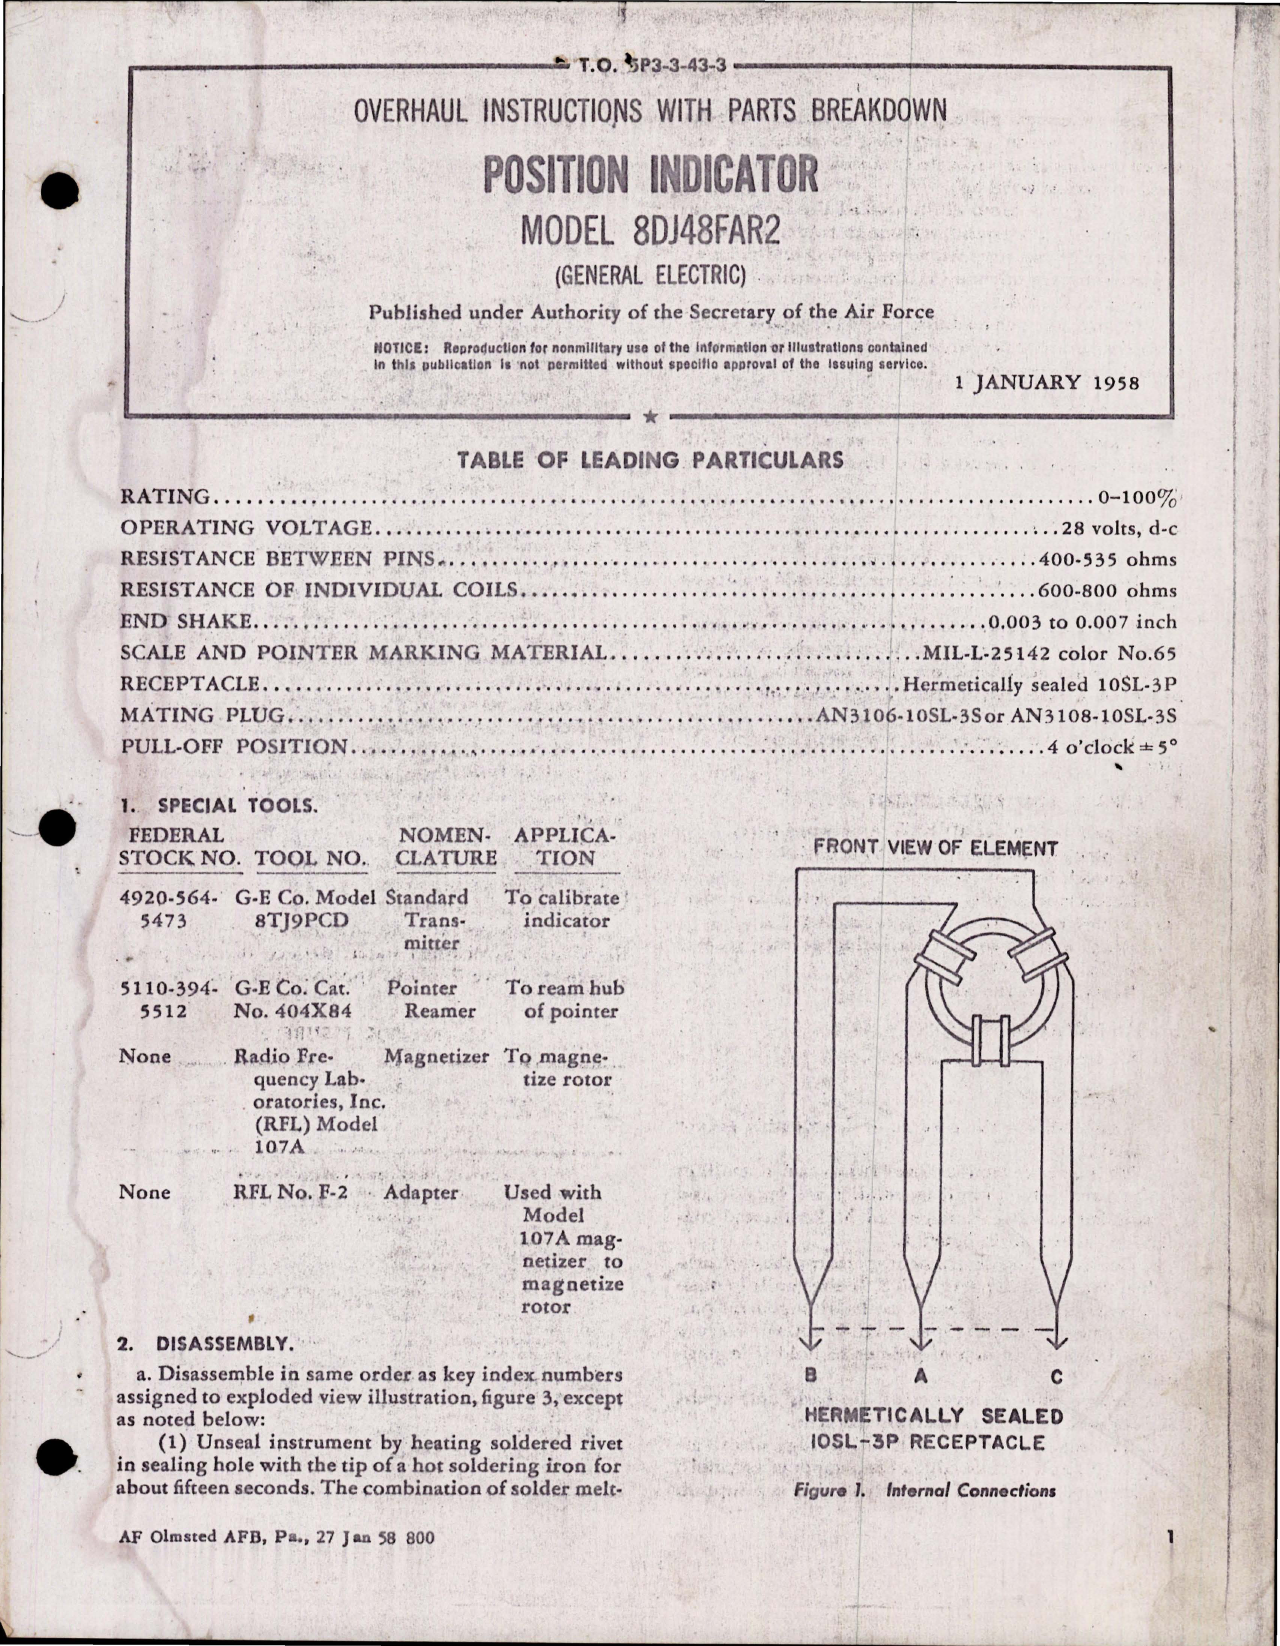 Sample page 1 from AirCorps Library document: Overhaul Instructions with Parts for Position Indicator - Model 8DJ48FAR2 